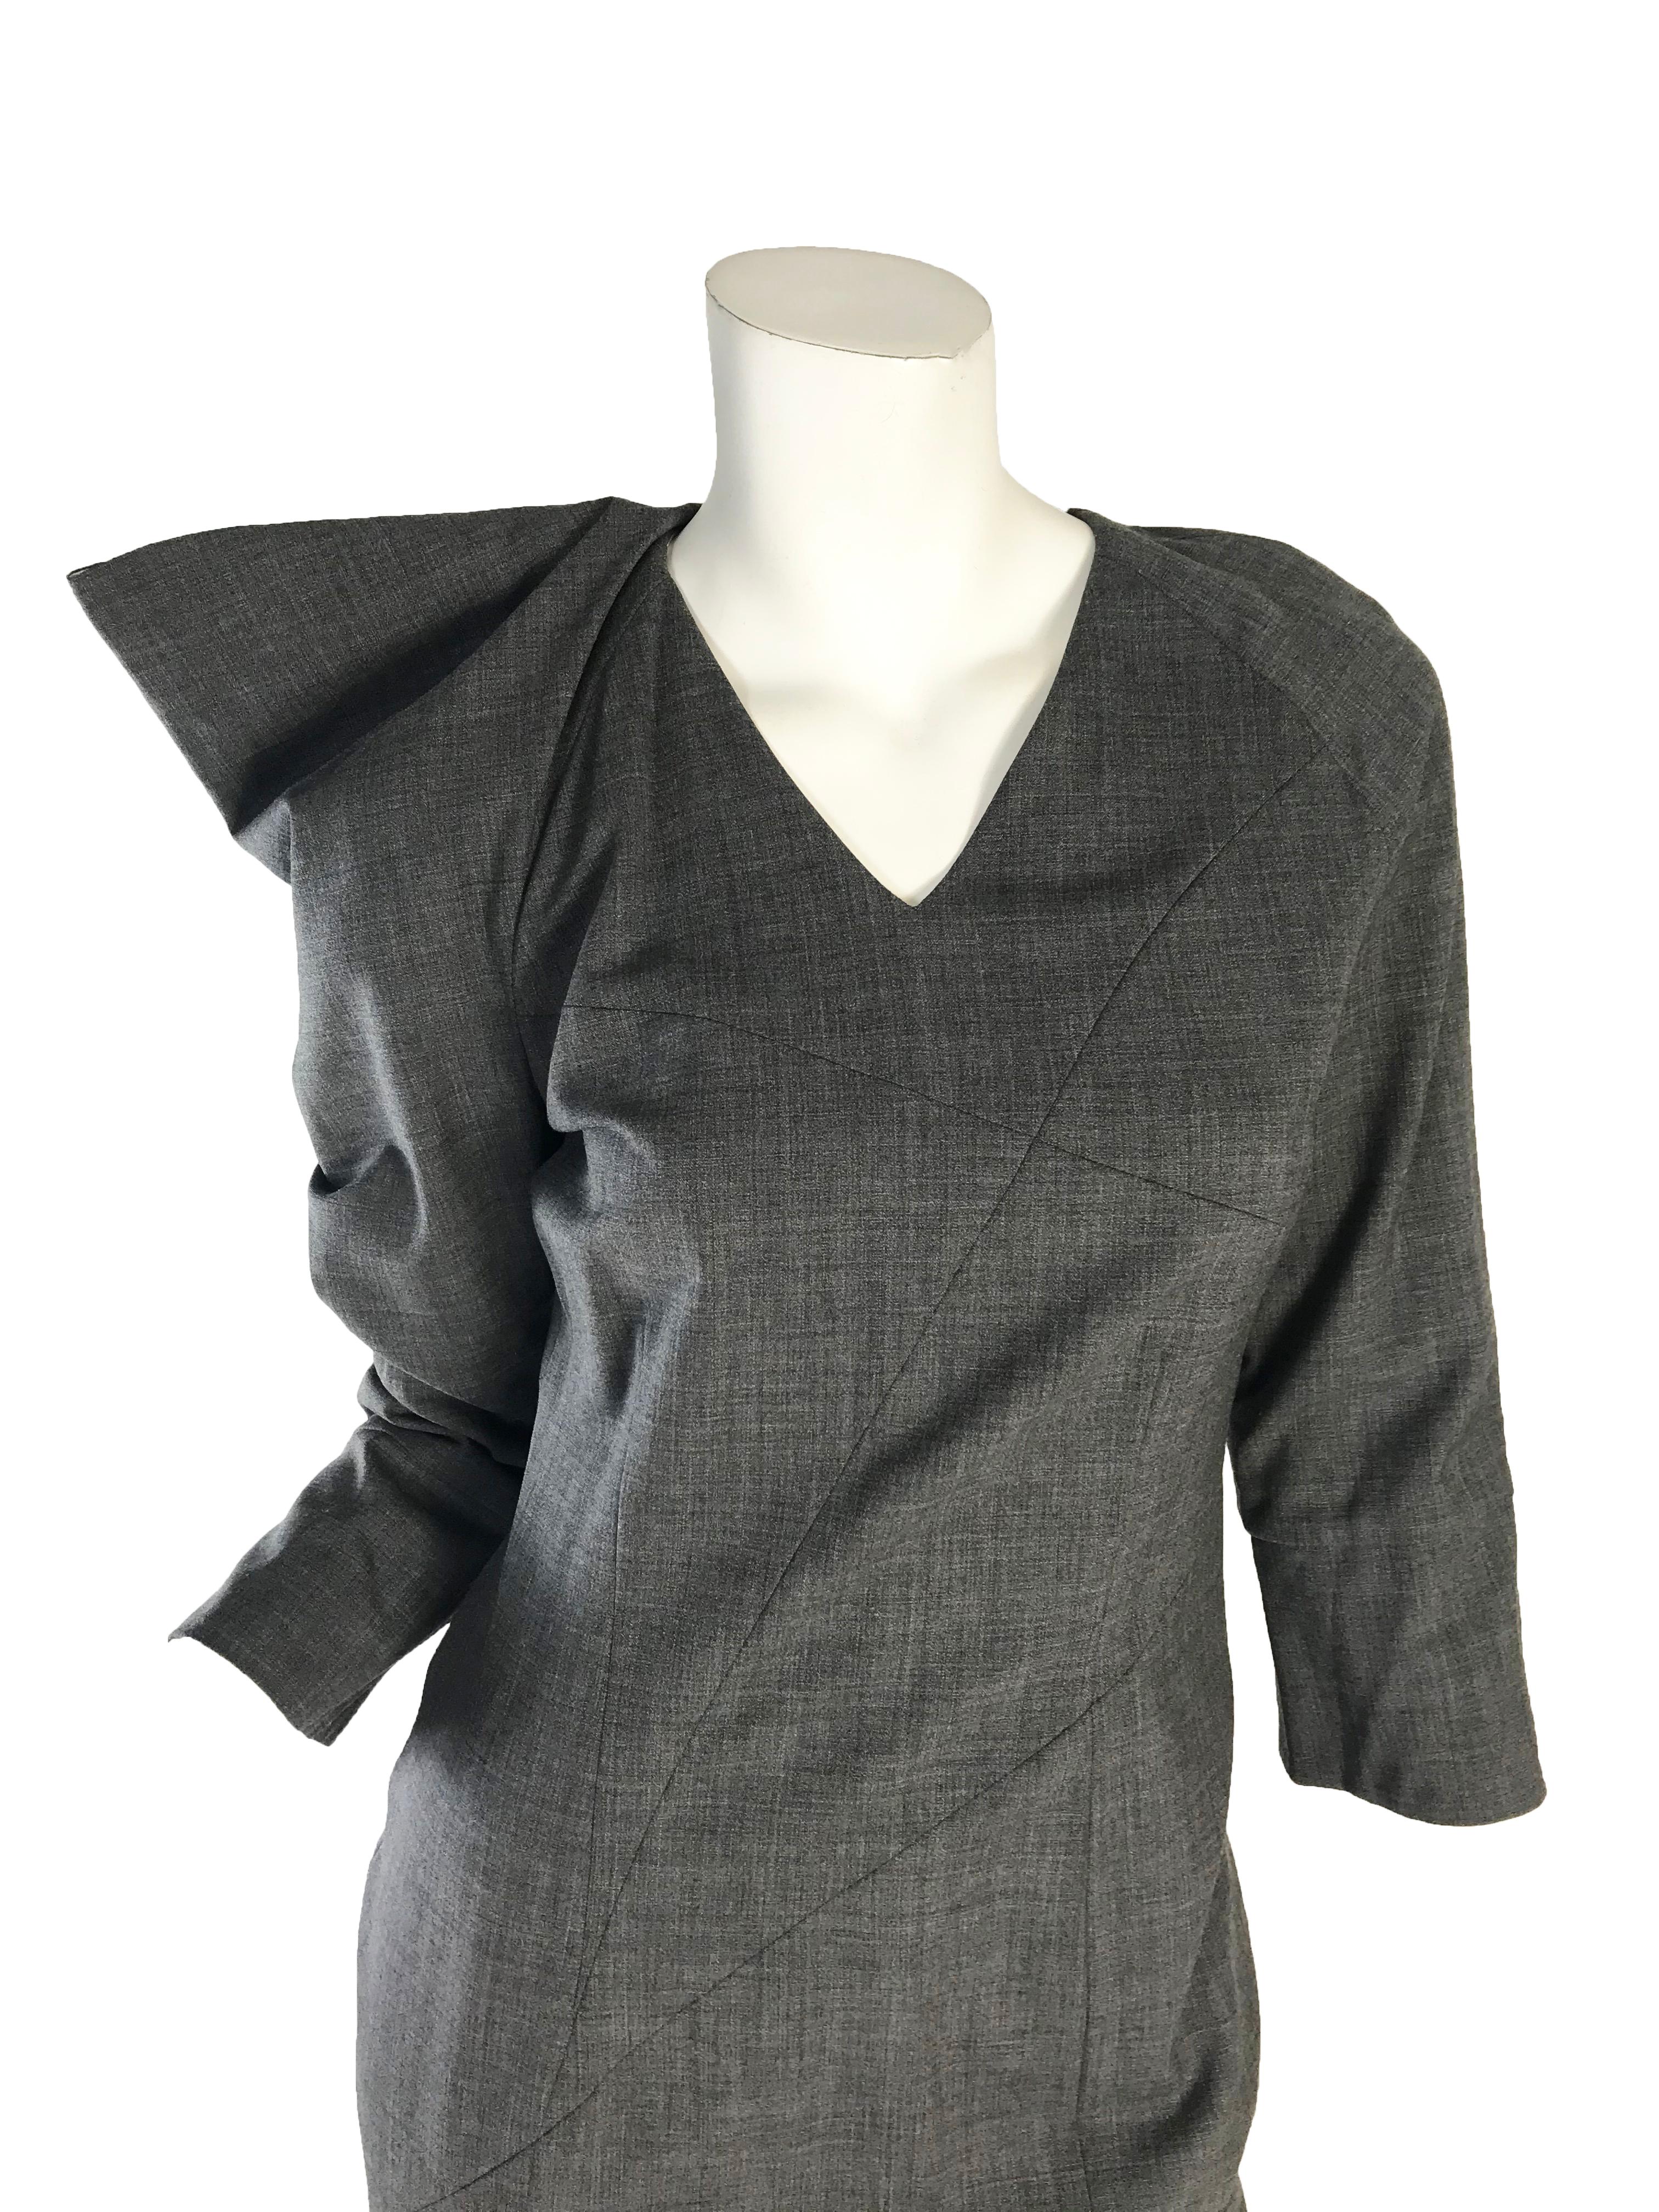 Masaki Matsushima grey wool dress, high slit. 

Condition: Excellent
Made in Paris
Size 2 / US 6 
 